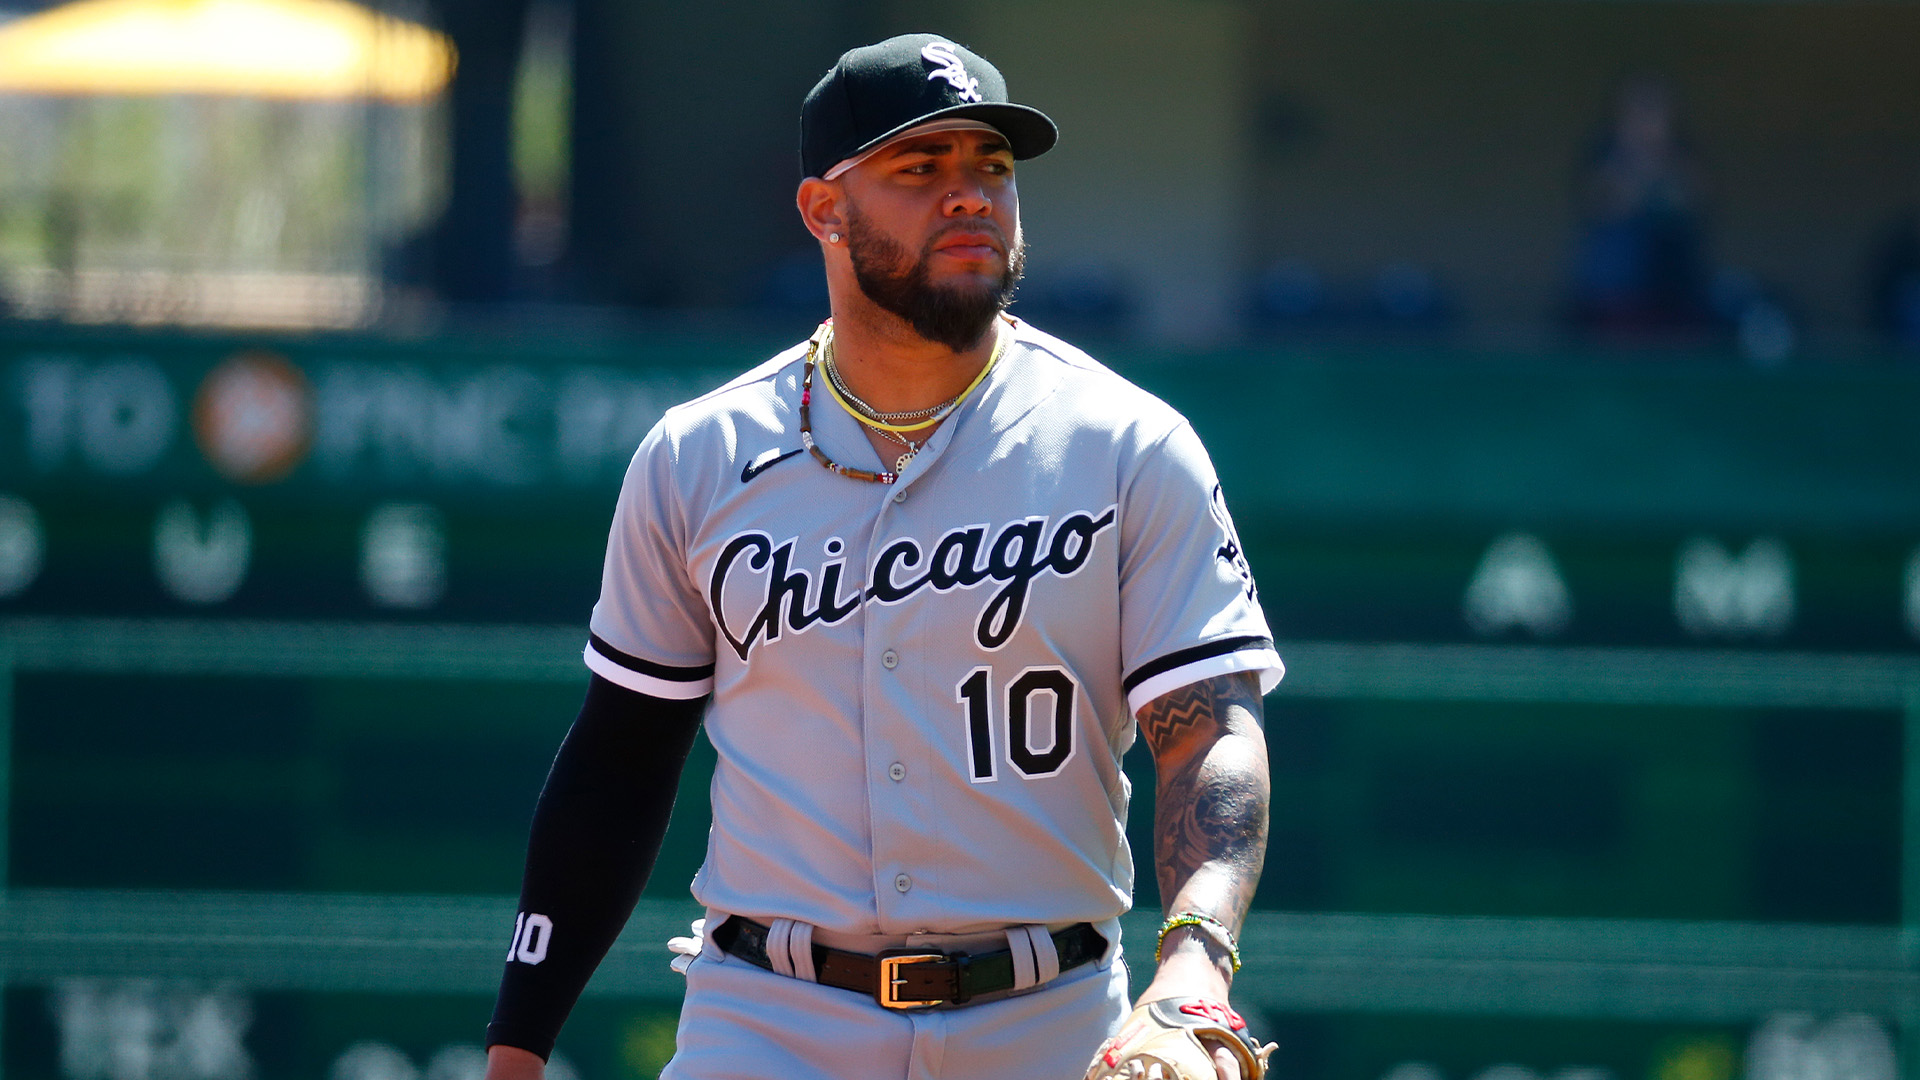 White Sox injury update: Yoan Moncada dealing with back issue - On